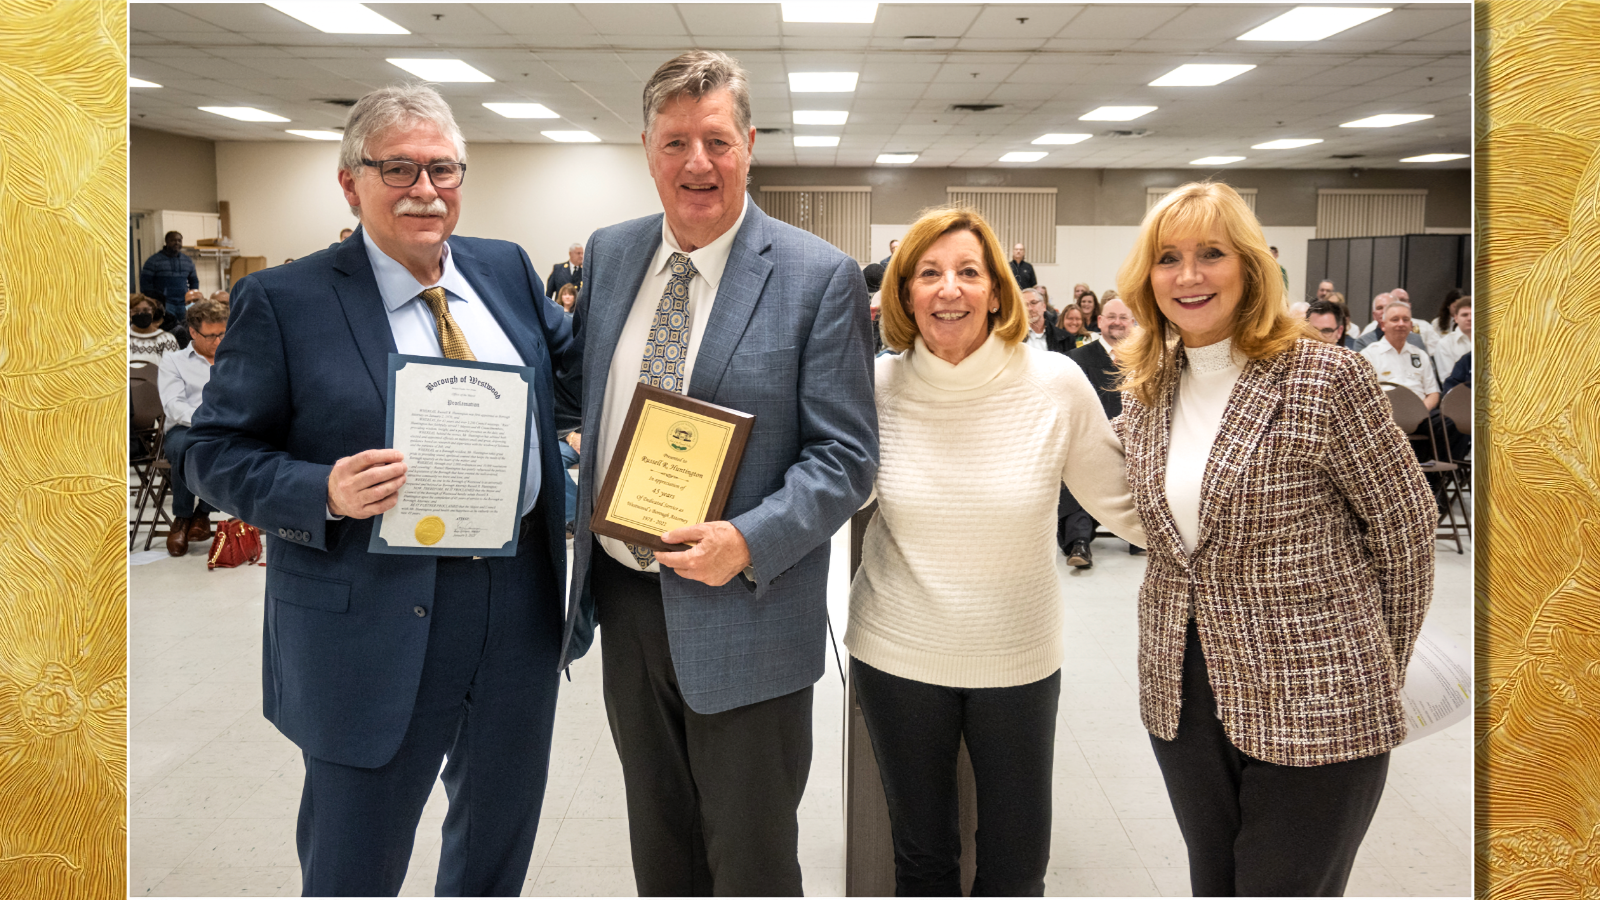 Russell Huntington honored for 45 years of legal guidance, care — Pascack Press and Northern Valley Press